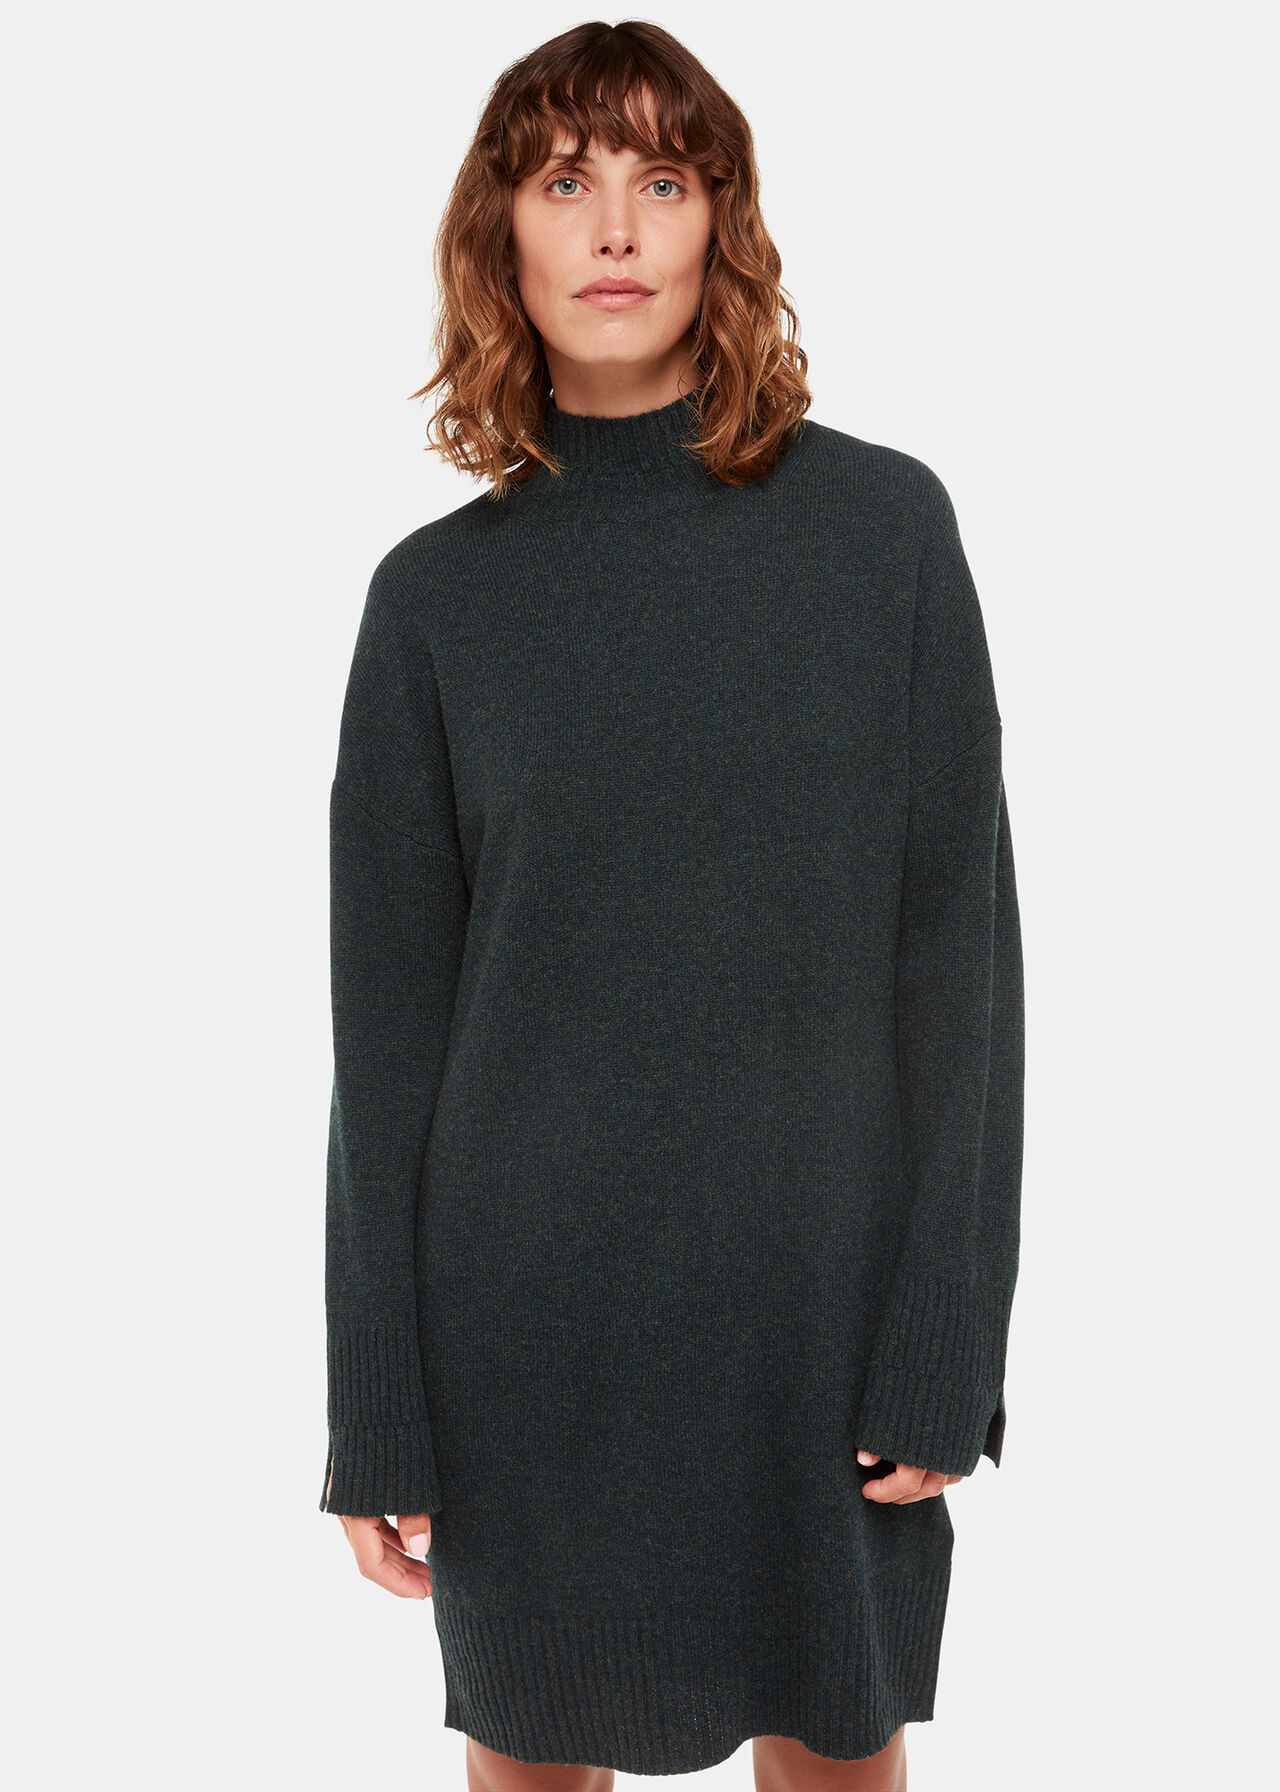 Forest Green Amelia Wool Knitted Dress | WHISTLES